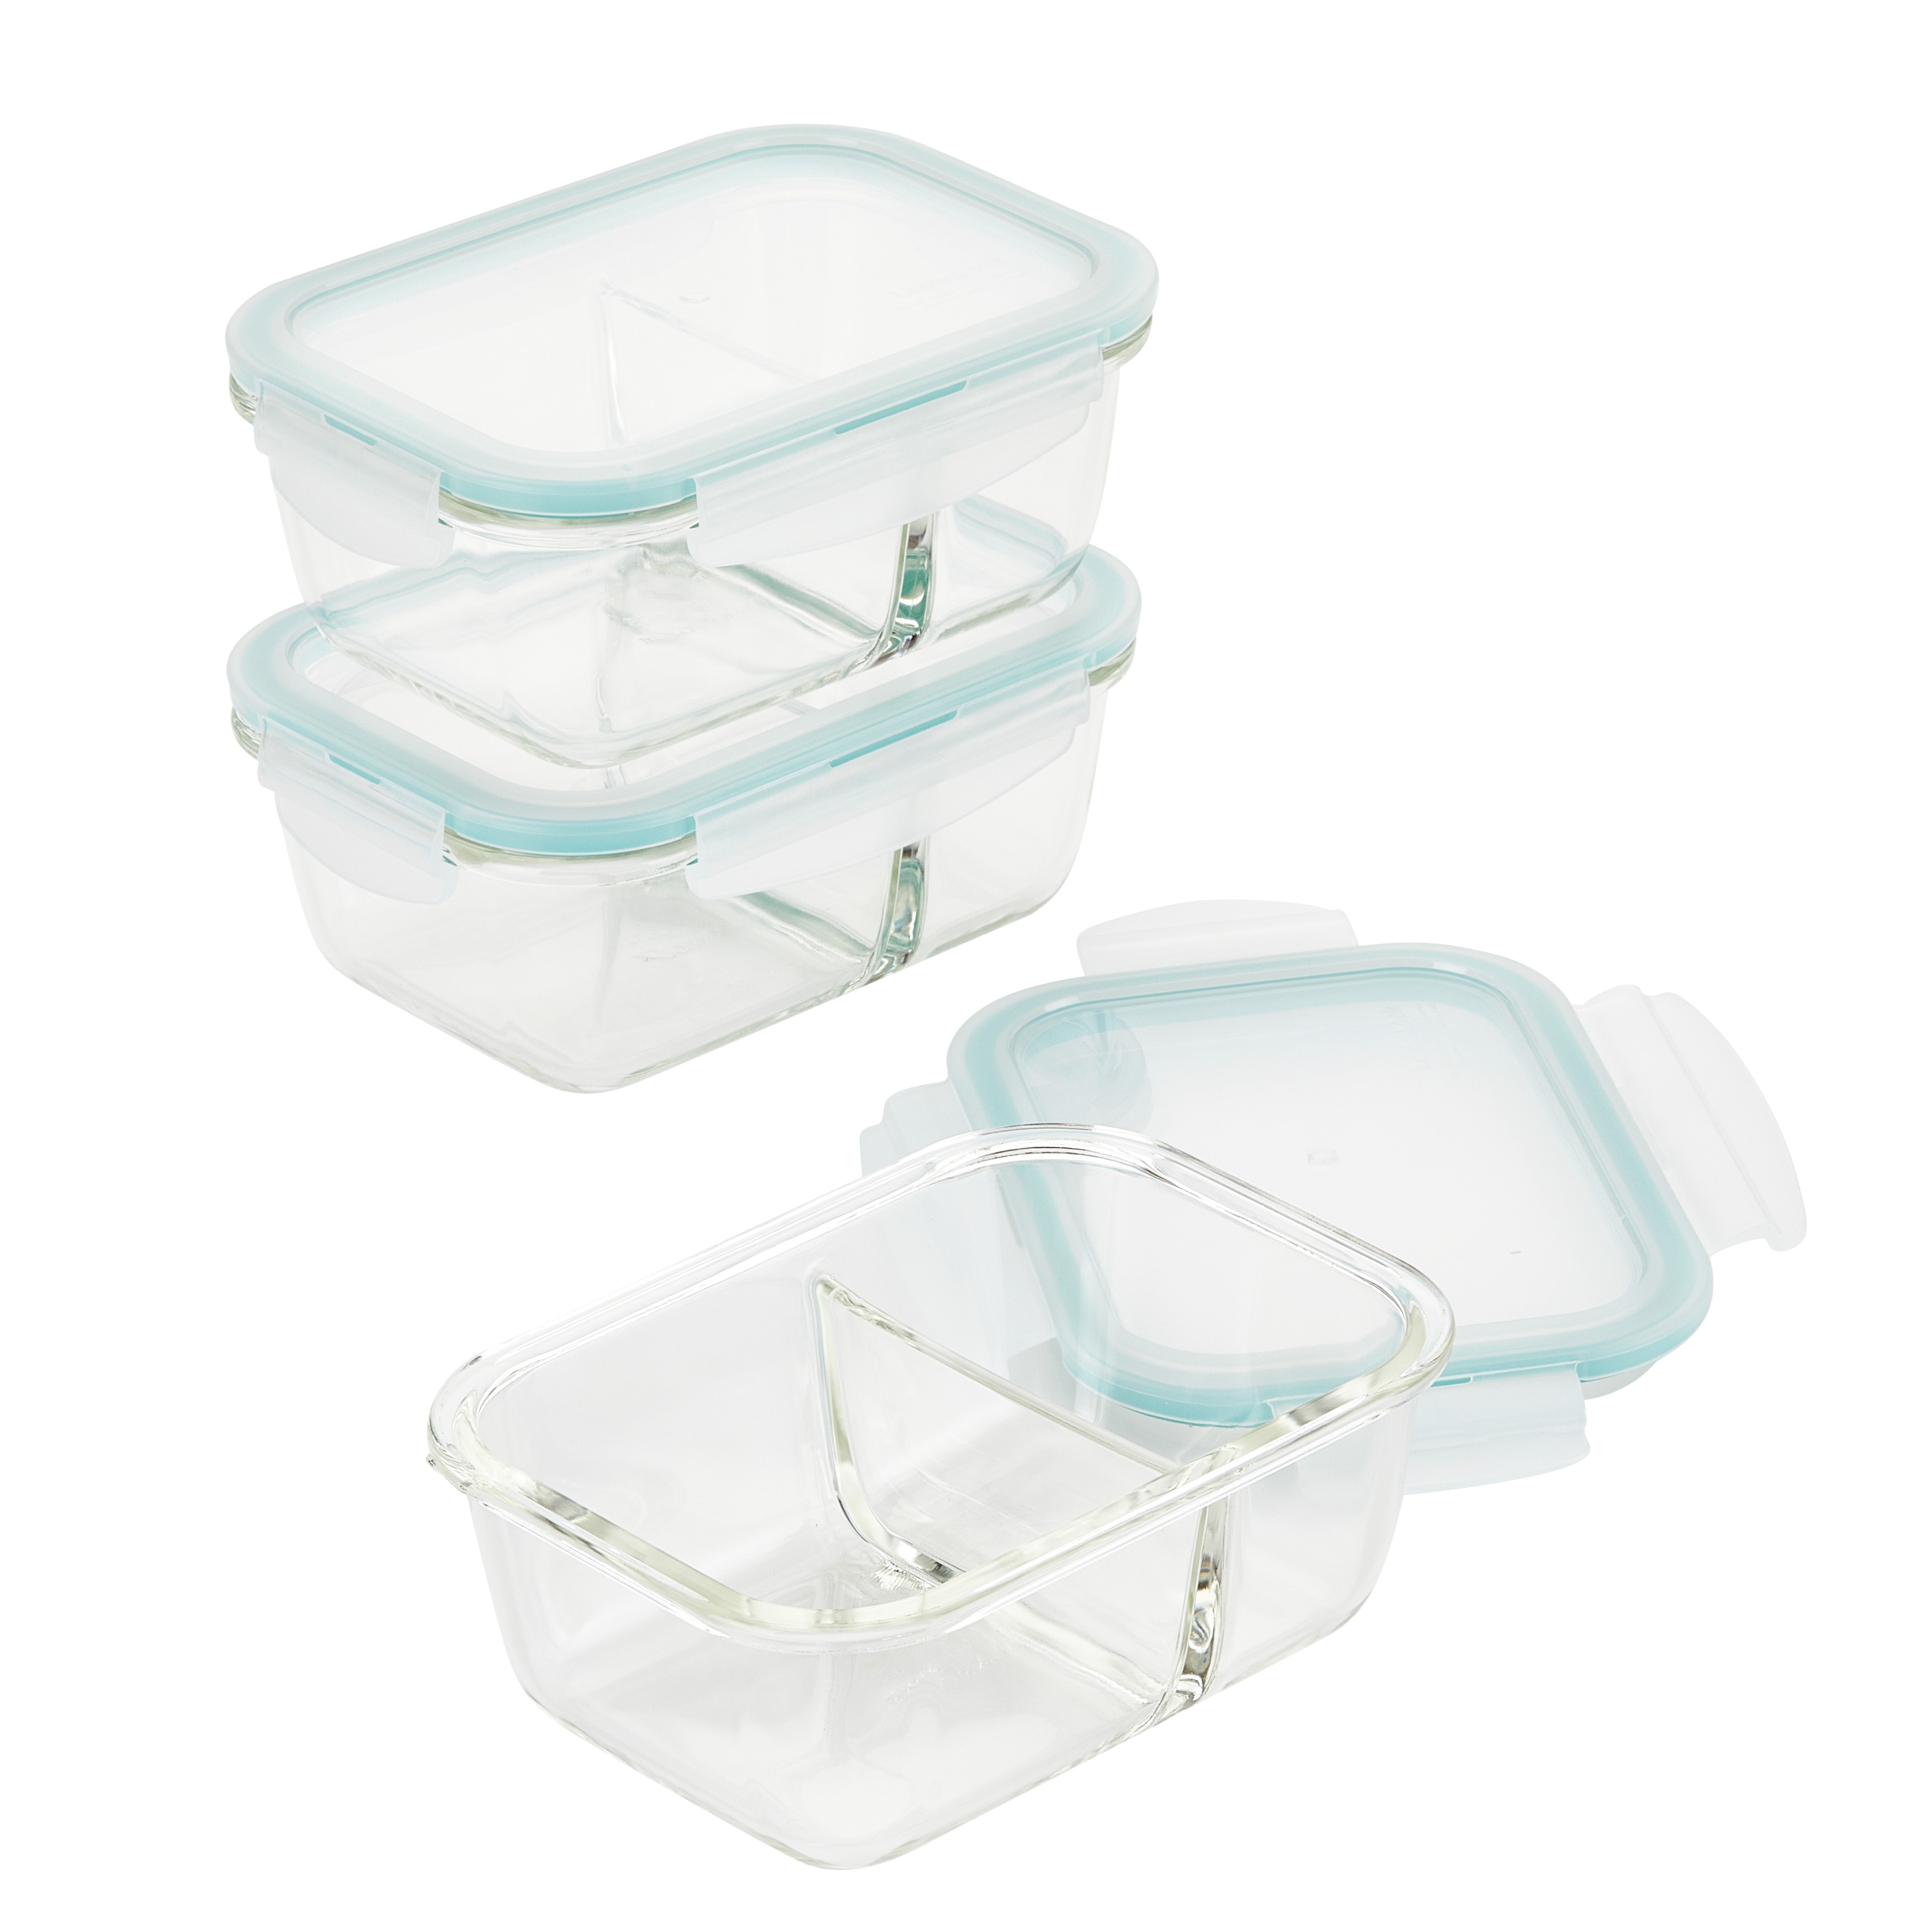 https://ak1.ostkcdn.com/images/products/is/images/direct/28d2bdc4309eda4ca541e109560ca2cc26dbf68a/LocknLock-Purely-Better-Glass-Divided-Rectangular-Food-Storage-Containers%2C-25-Ounce%2C-Set-of-Three.jpg